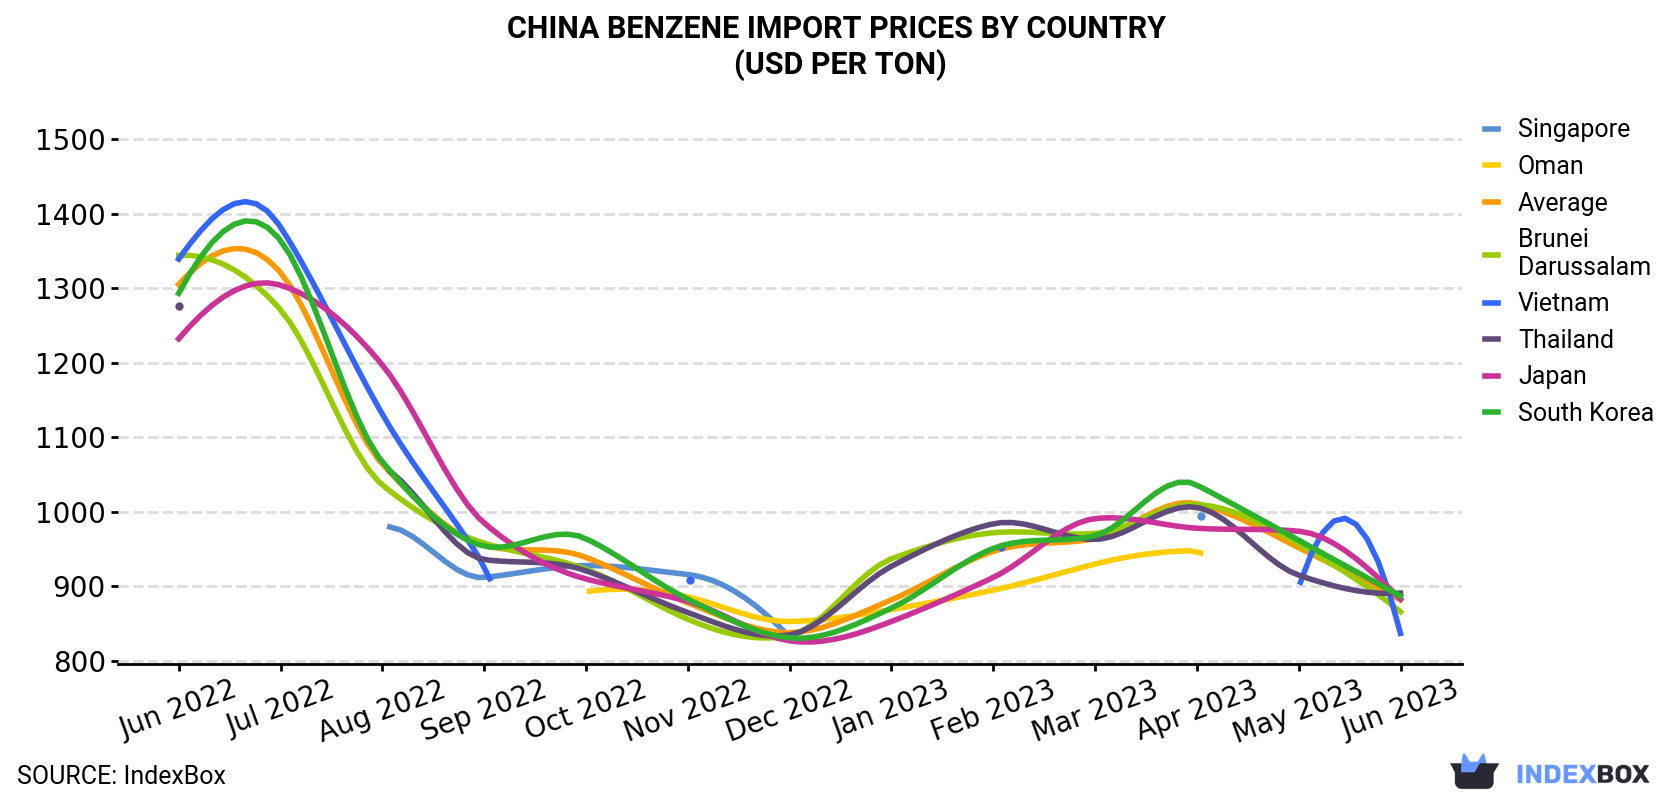 China Benzene Import Prices By Country (USD Per Ton)